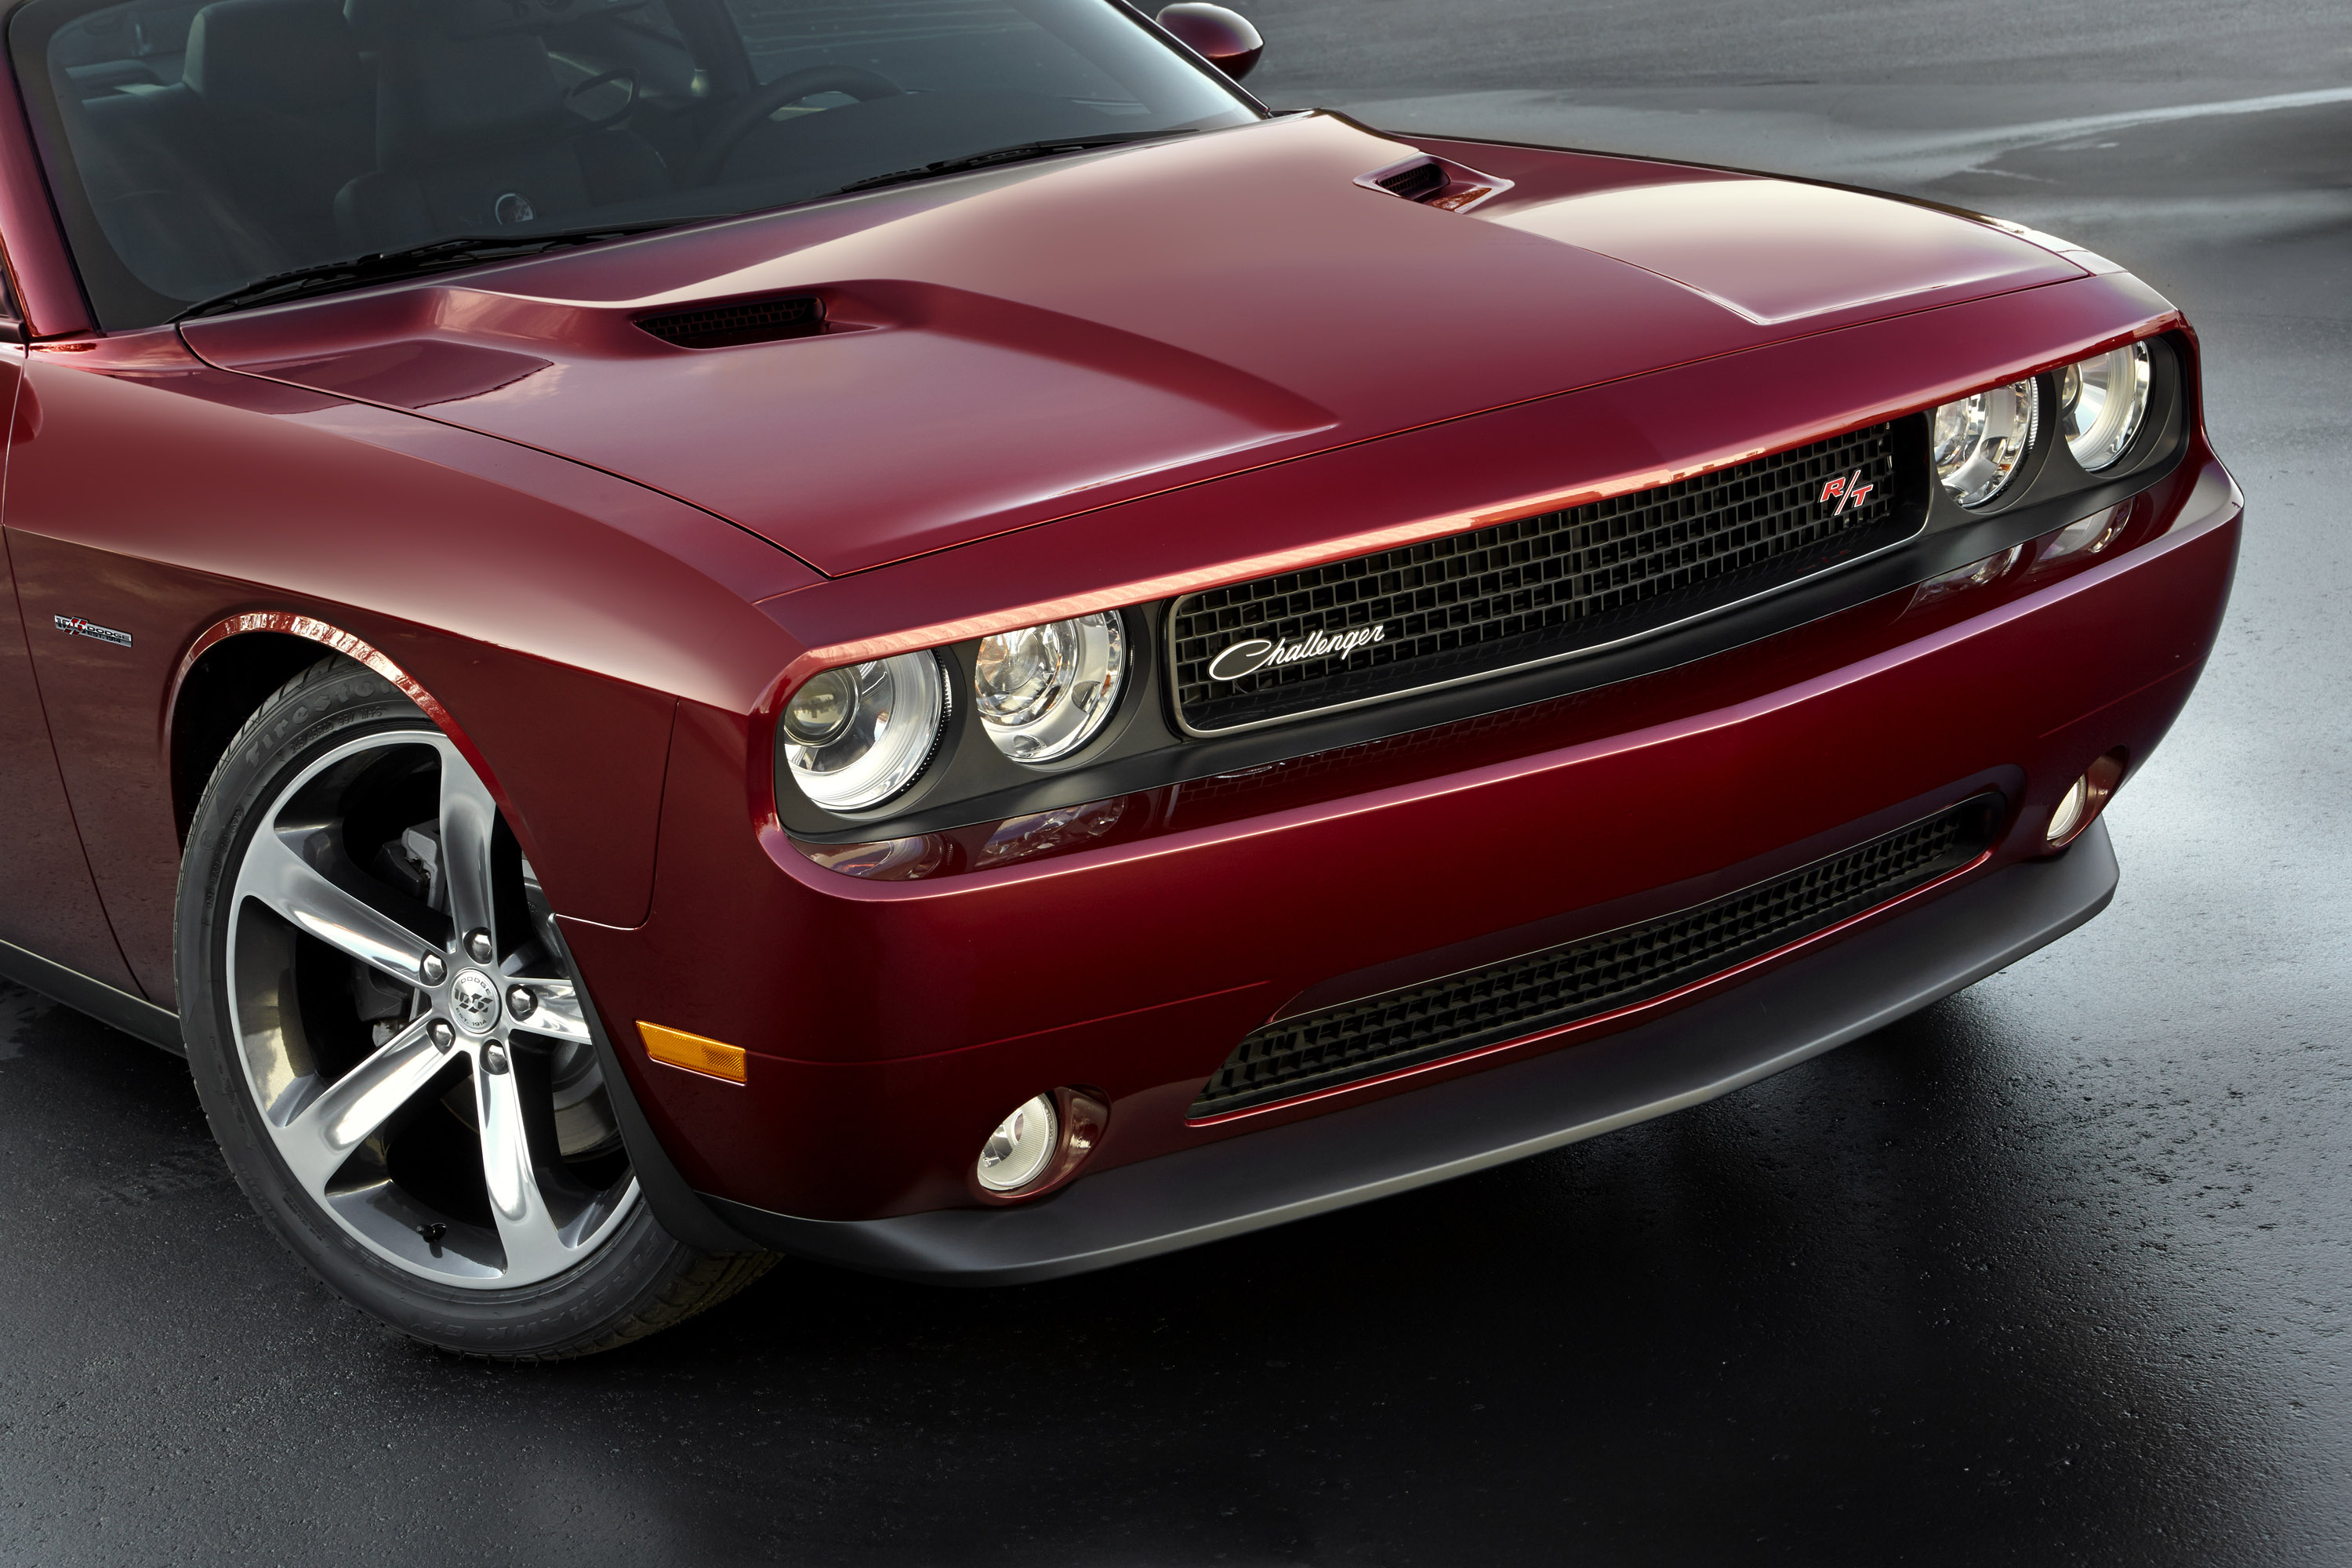 2014 Dodge Challenger 100th Anniversary Edition Hd Pictures